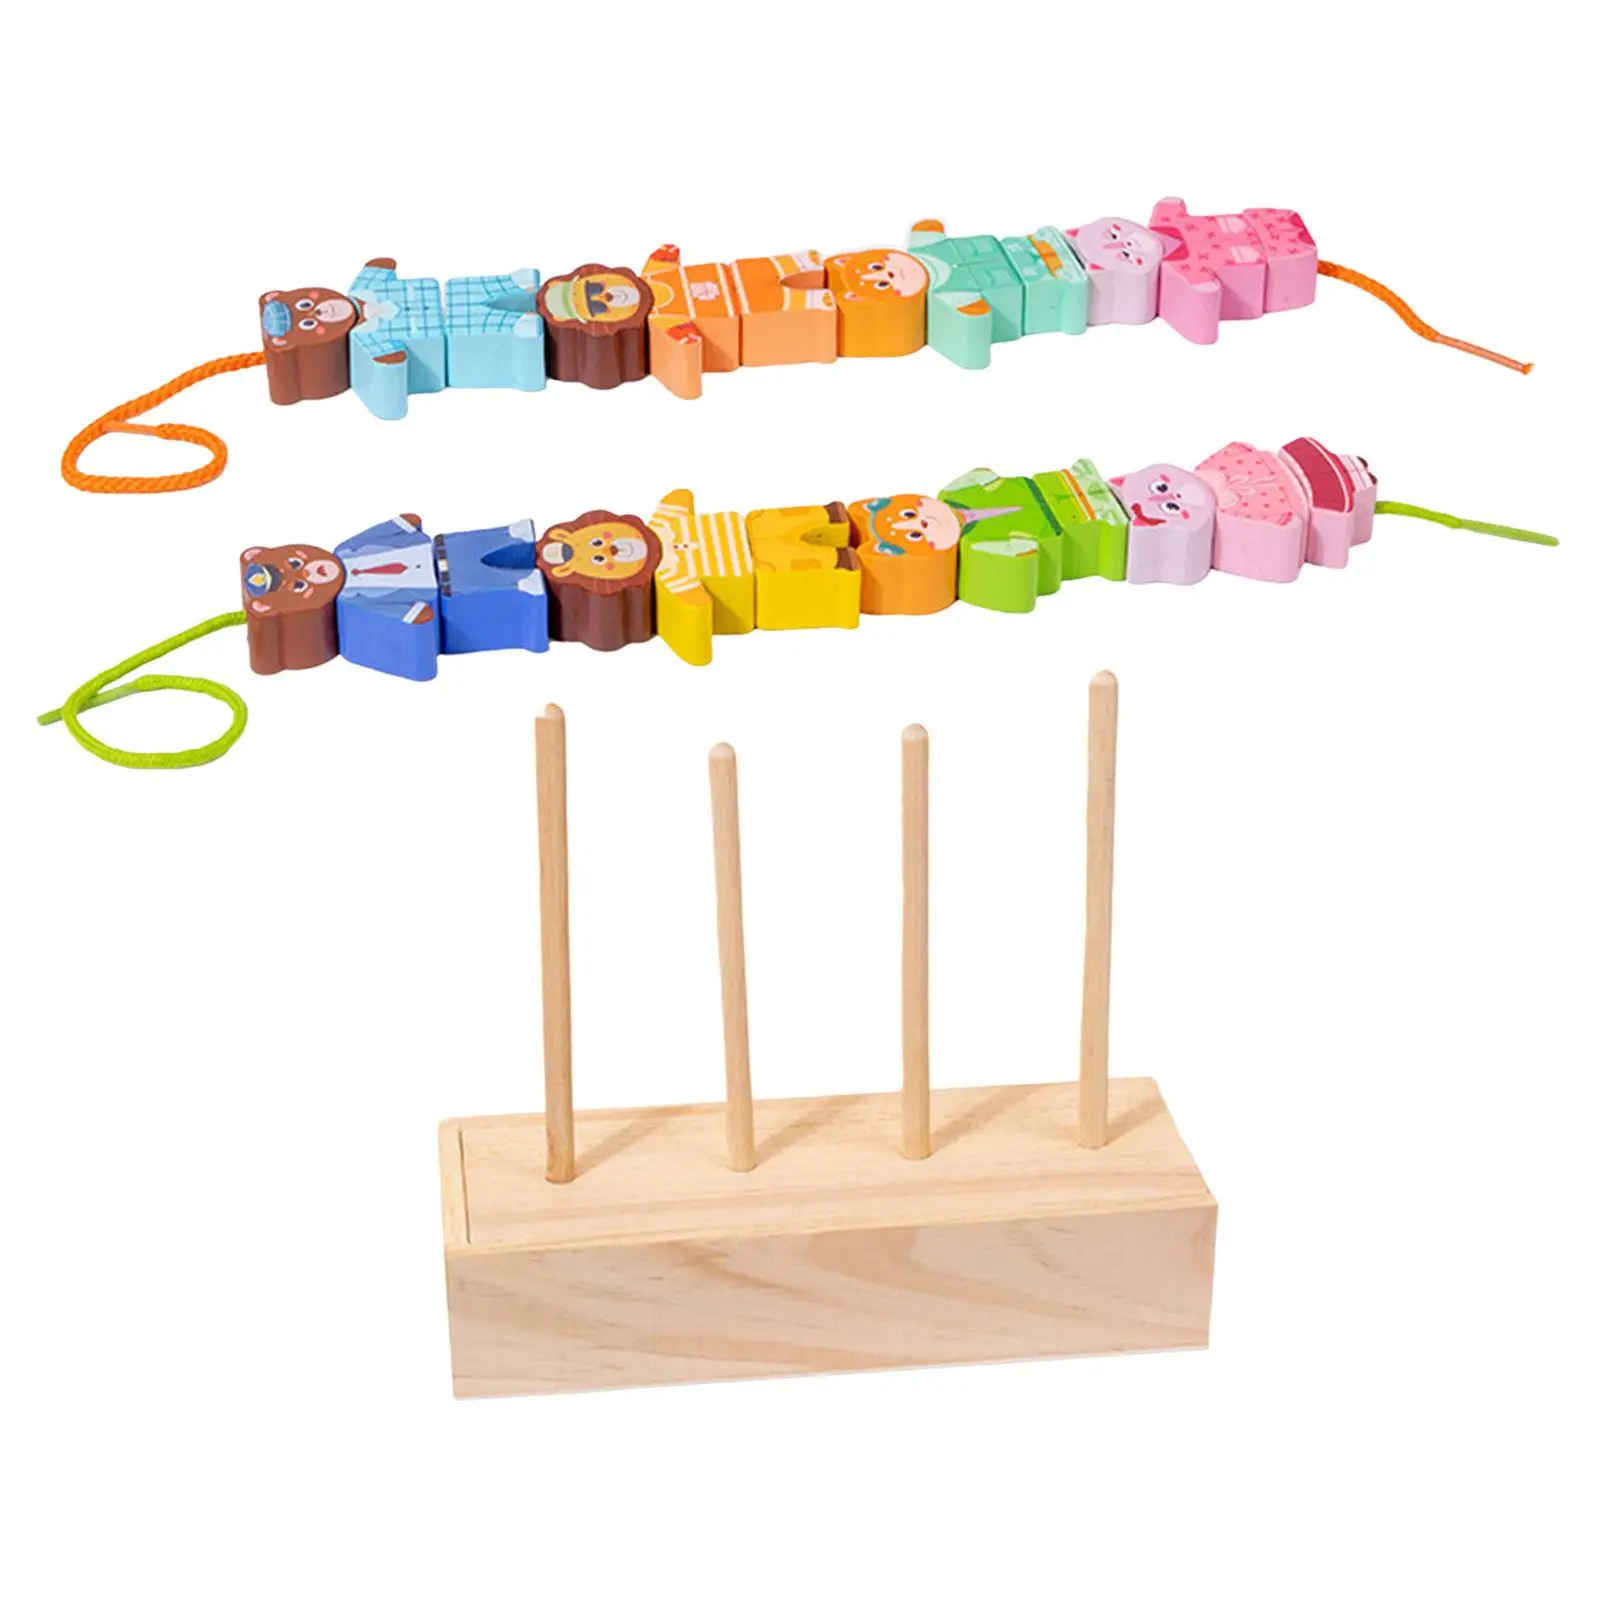 Animal Stringing Threading Wooden Beads Toy Early Learning Toys Educational Toy for Kids Toddlers Boys 1 2 3 4 Years Old Gifts